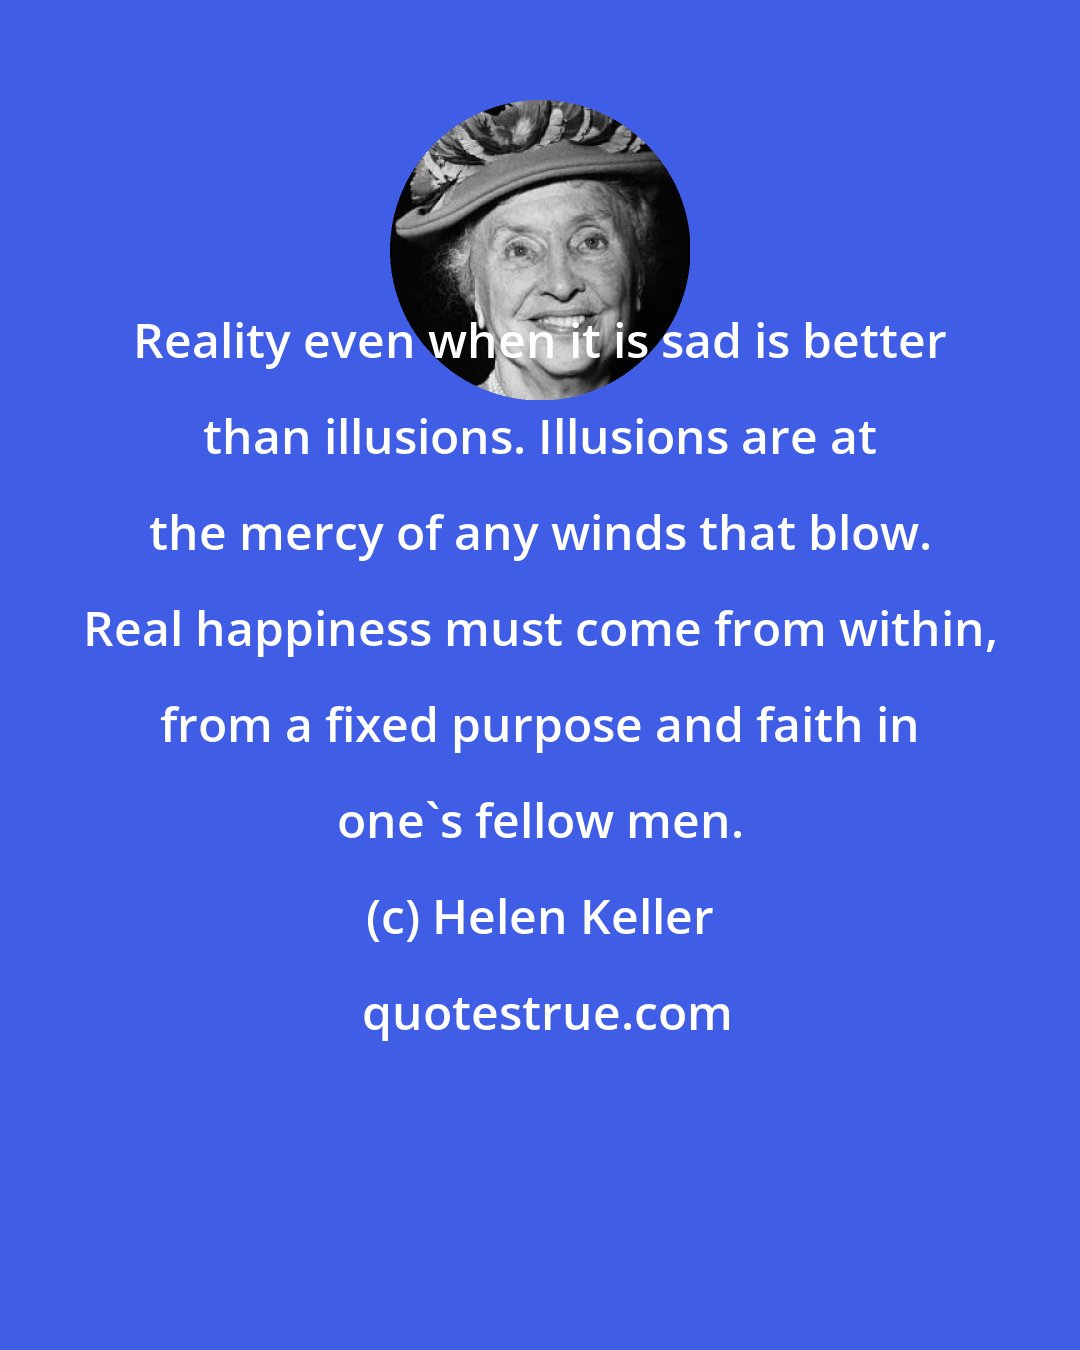 Helen Keller: Reality even when it is sad is better than illusions. Illusions are at the mercy of any winds that blow. Real happiness must come from within, from a fixed purpose and faith in one's fellow men.